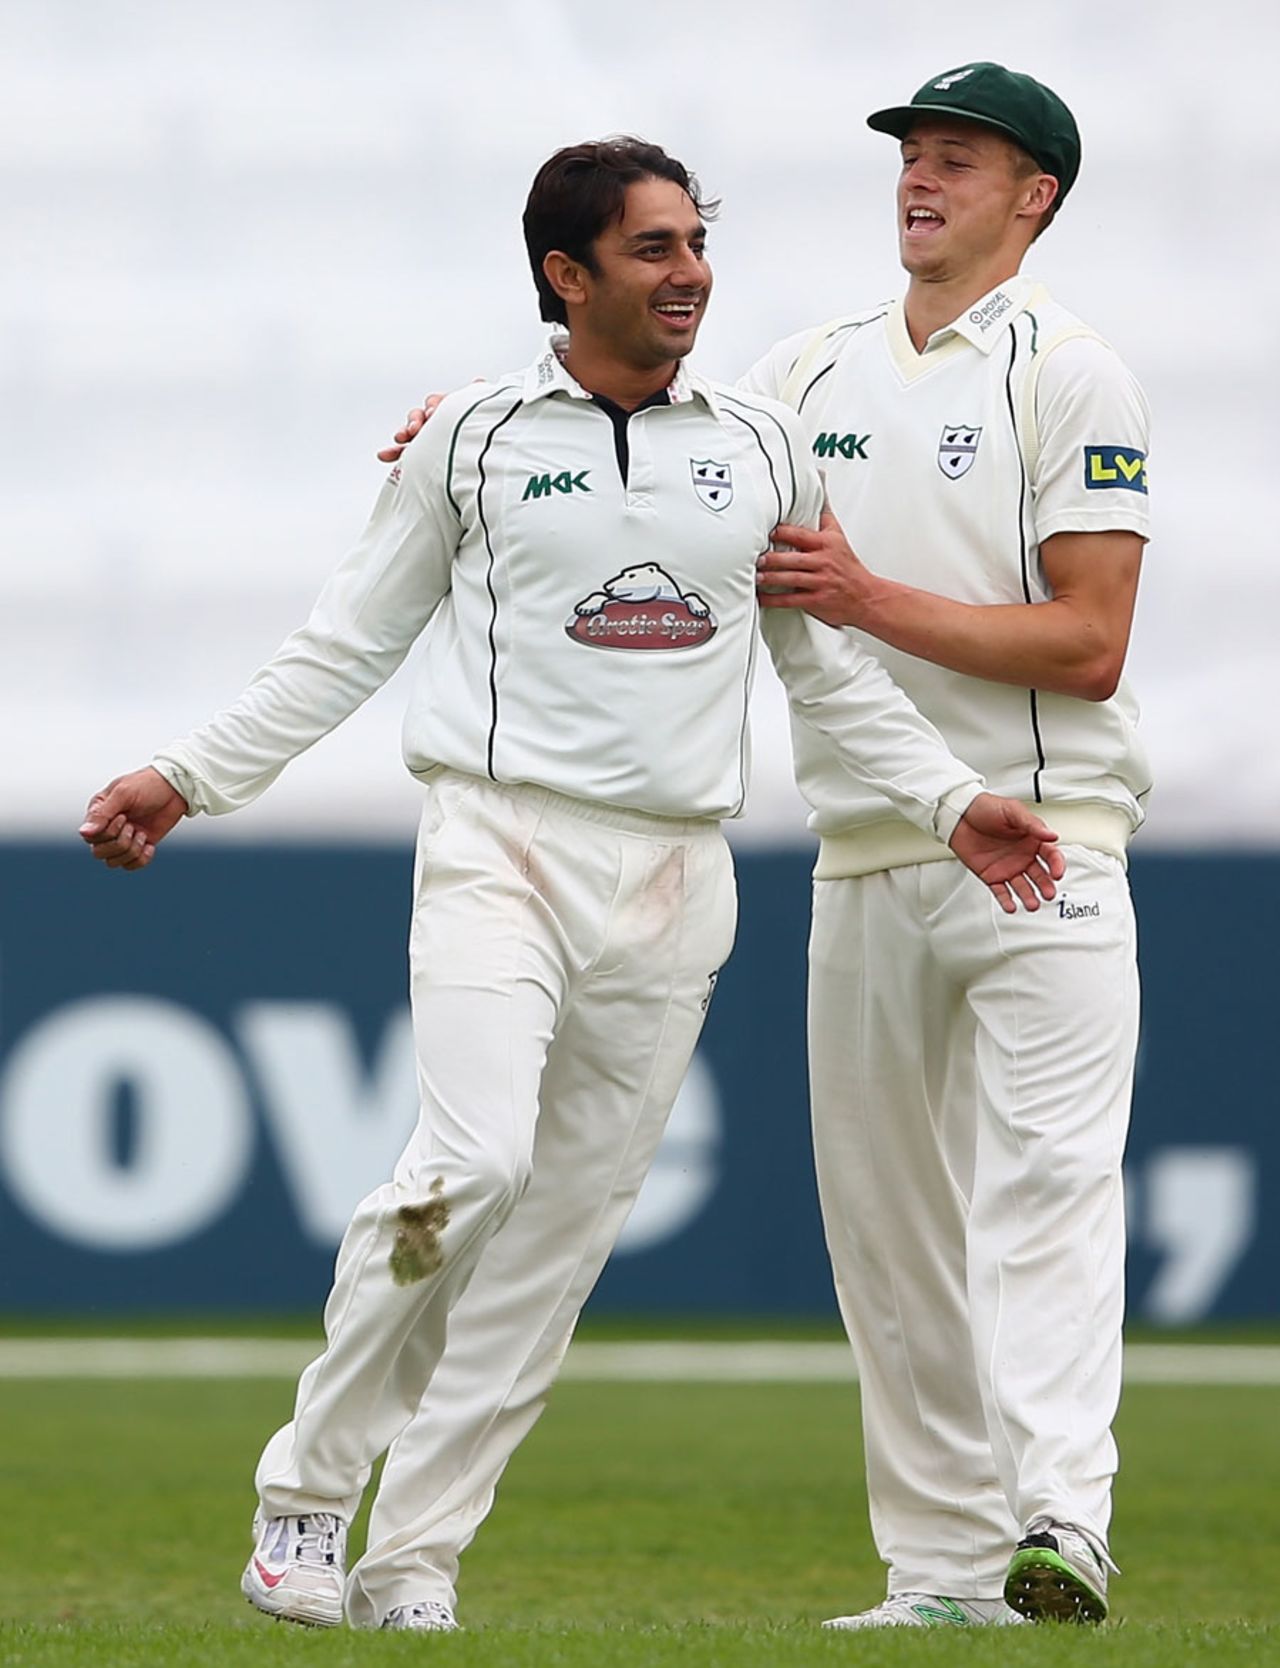 Saeed Ajmal celebrates a wicket with Alexei Kervezee, Worcestershire v Essex, County Championship, Division Two, 3rd day, May 20, 2014